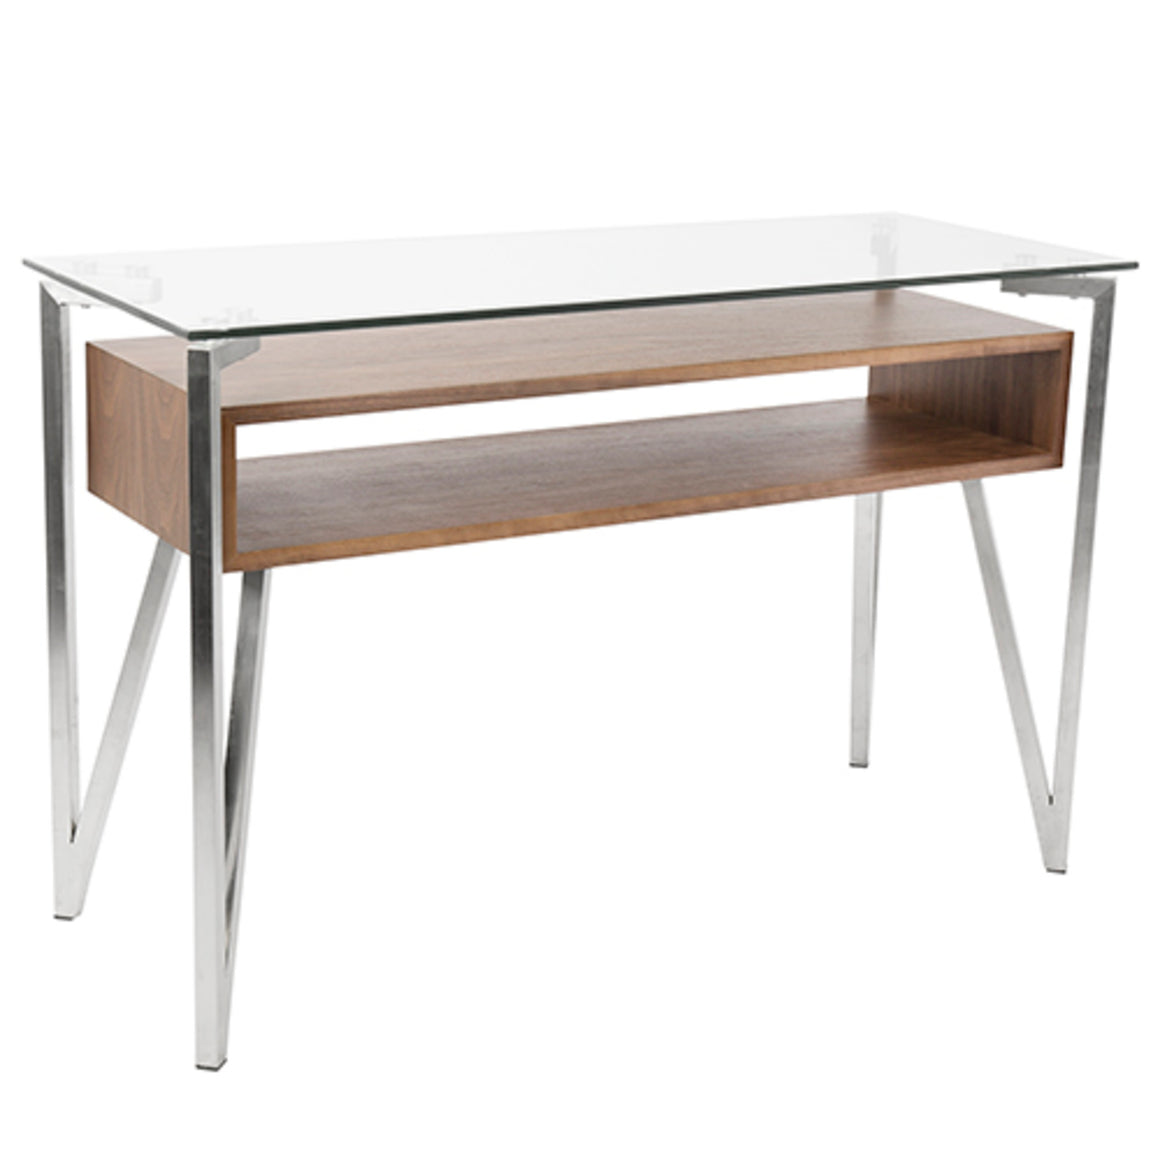 Hover Contemporary Console Table with Brushed Stainless Steel Frame, Walnut Wood Shelf, and Clear Glass Top by LumiSource